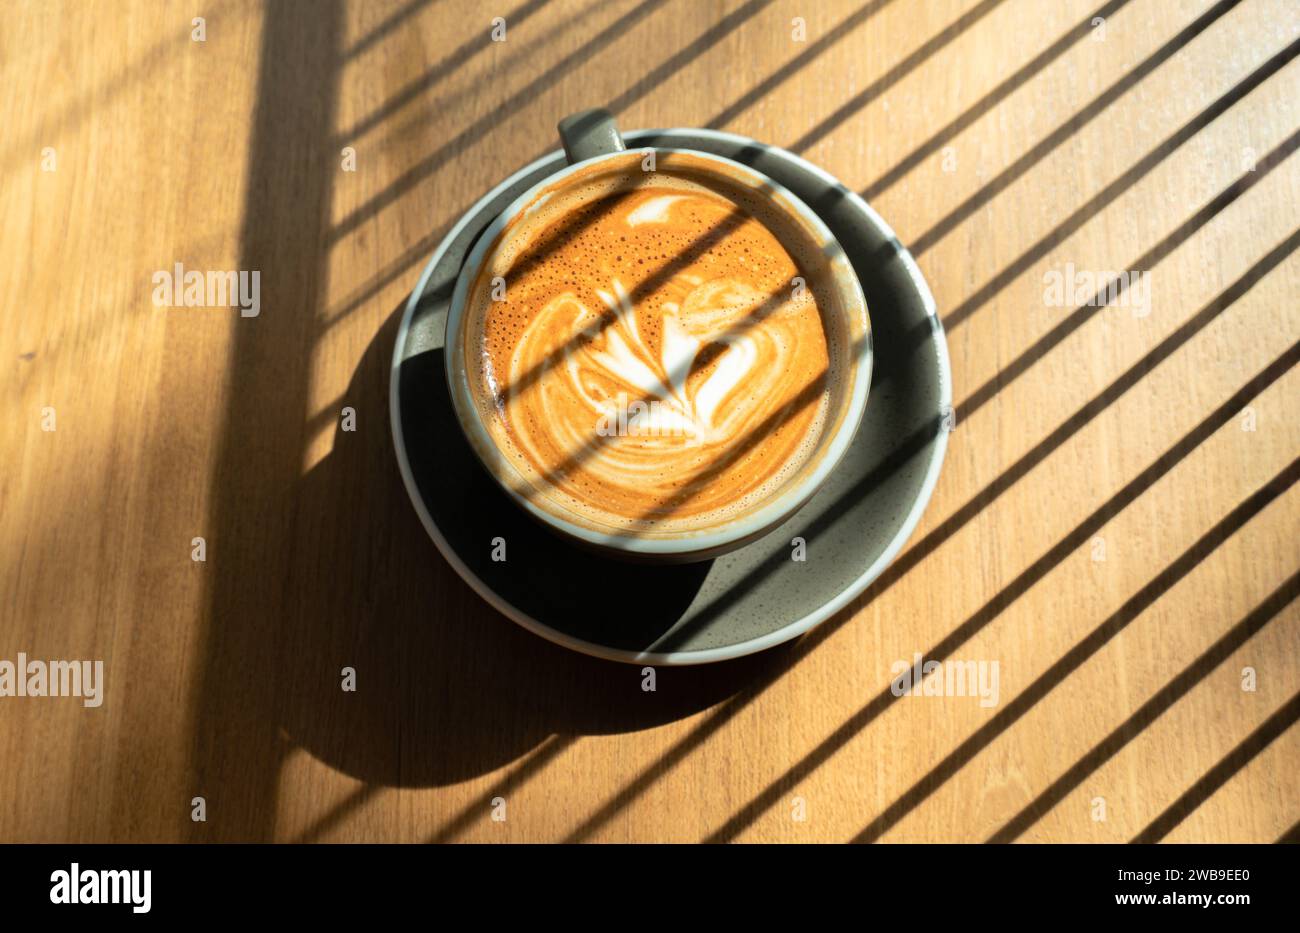 Late coffee art on the wooden table. relaxation concept. Iced coffee latte with soft white milk foam and sunlight shining through. Photograph of a cup Stock Photo